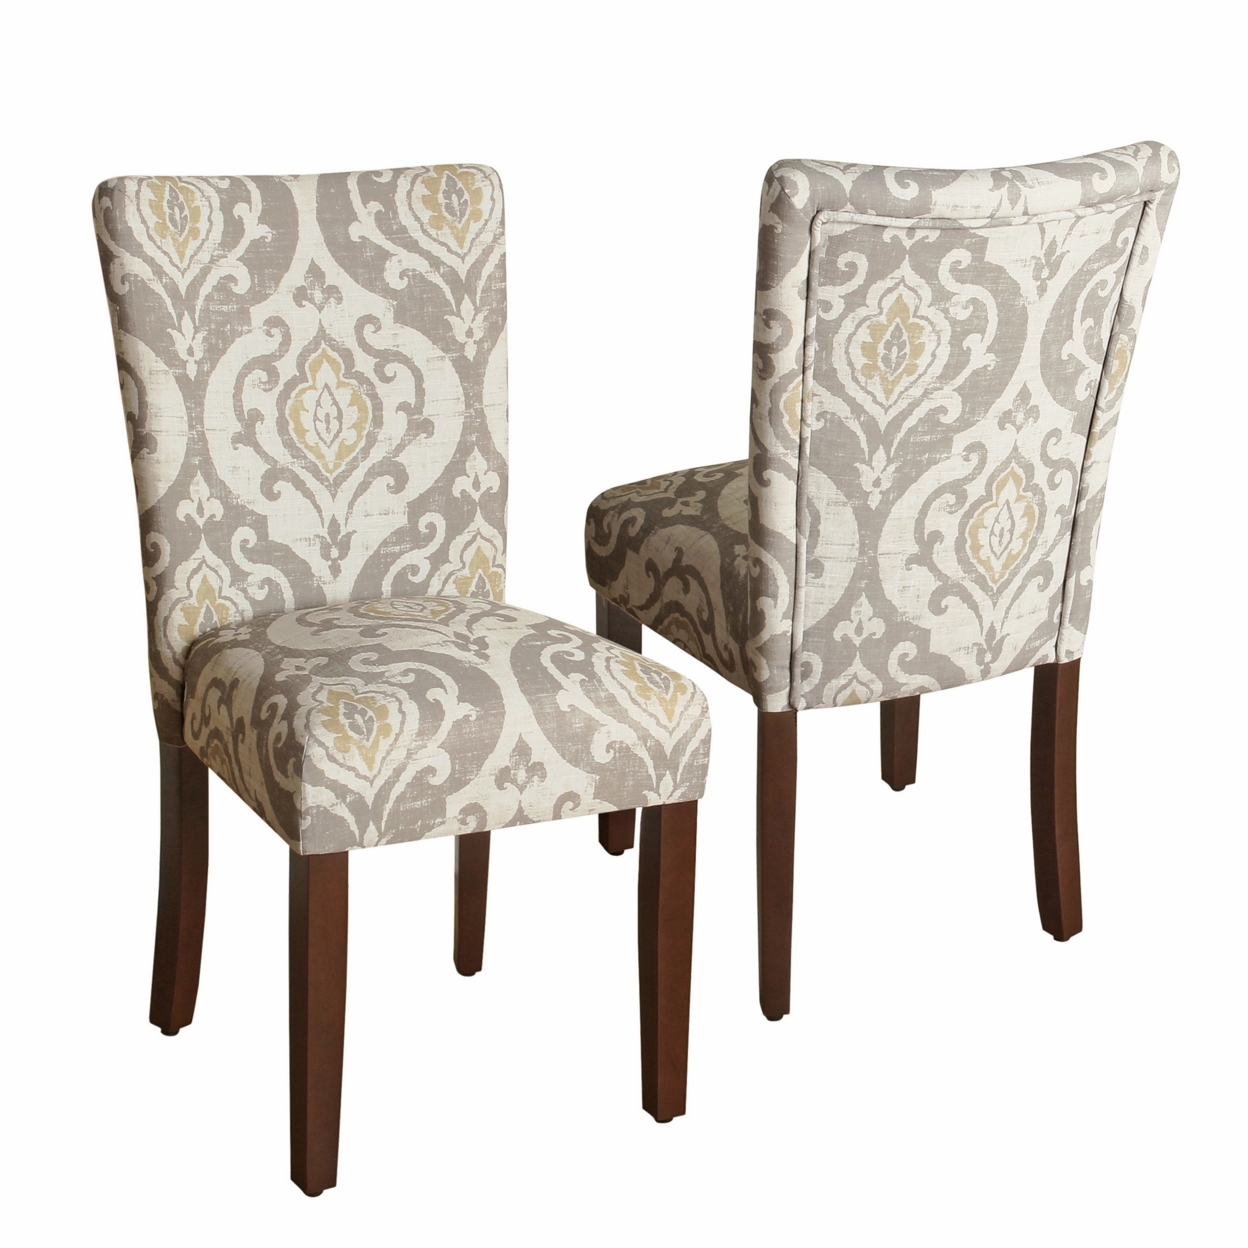 Wooden Dining Chair With Damask Print Fabric Upholstery And Tapered Feet, Multicolor, Set Of Two- Saltoro Sherpi